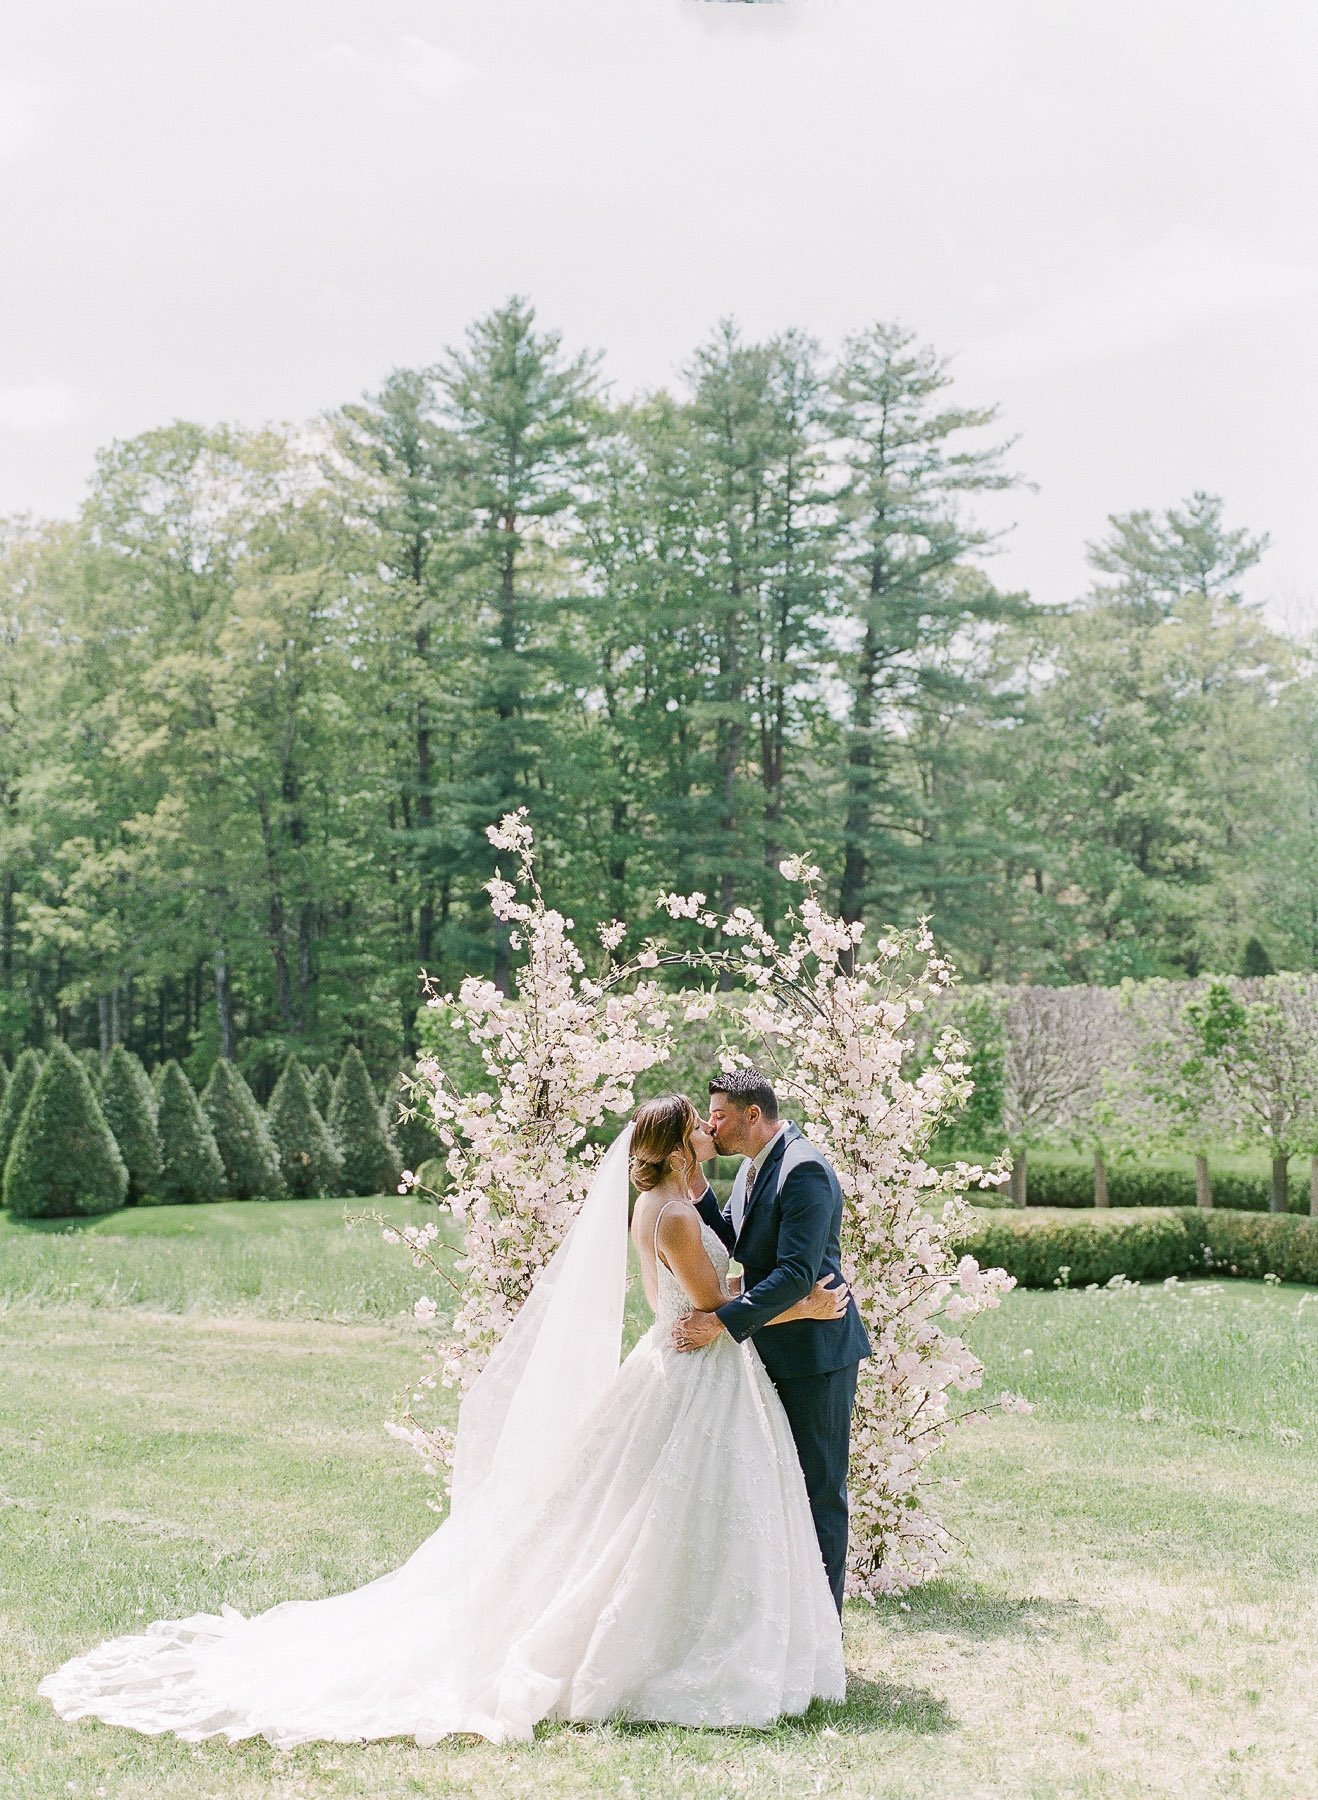 Kelly Strong The Mount Styled Wedding Editorial in Lenox MA by Michelle Lange Photography-60.jpg